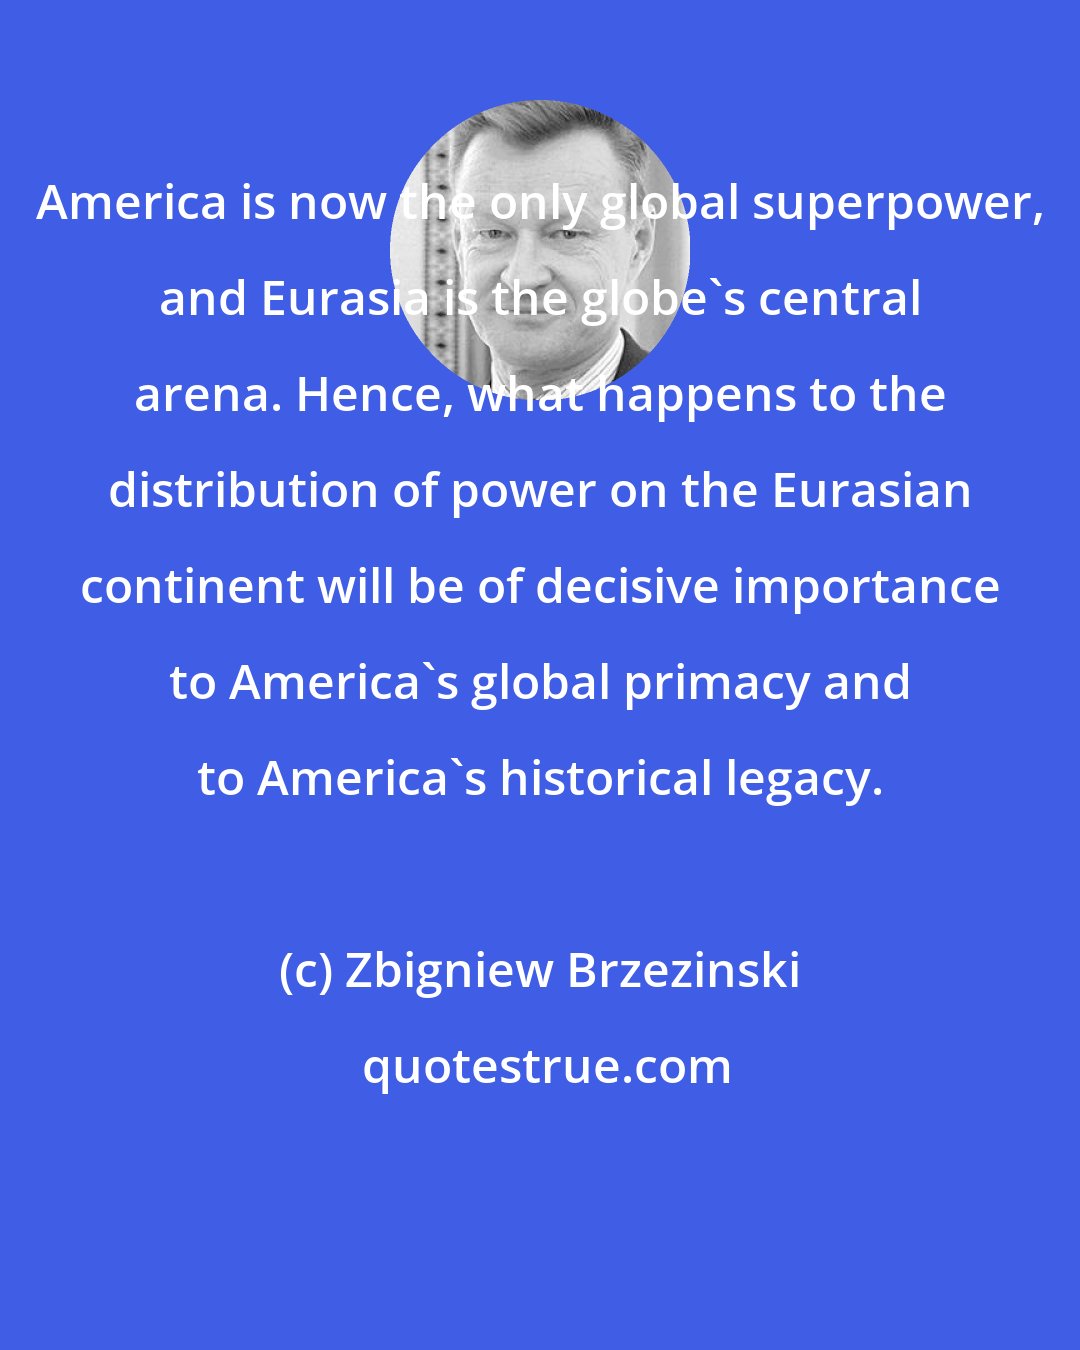 Zbigniew Brzezinski: America is now the only global superpower, and Eurasia is the globe's central arena. Hence, what happens to the distribution of power on the Eurasian continent will be of decisive importance to America's global primacy and to America's historical legacy.